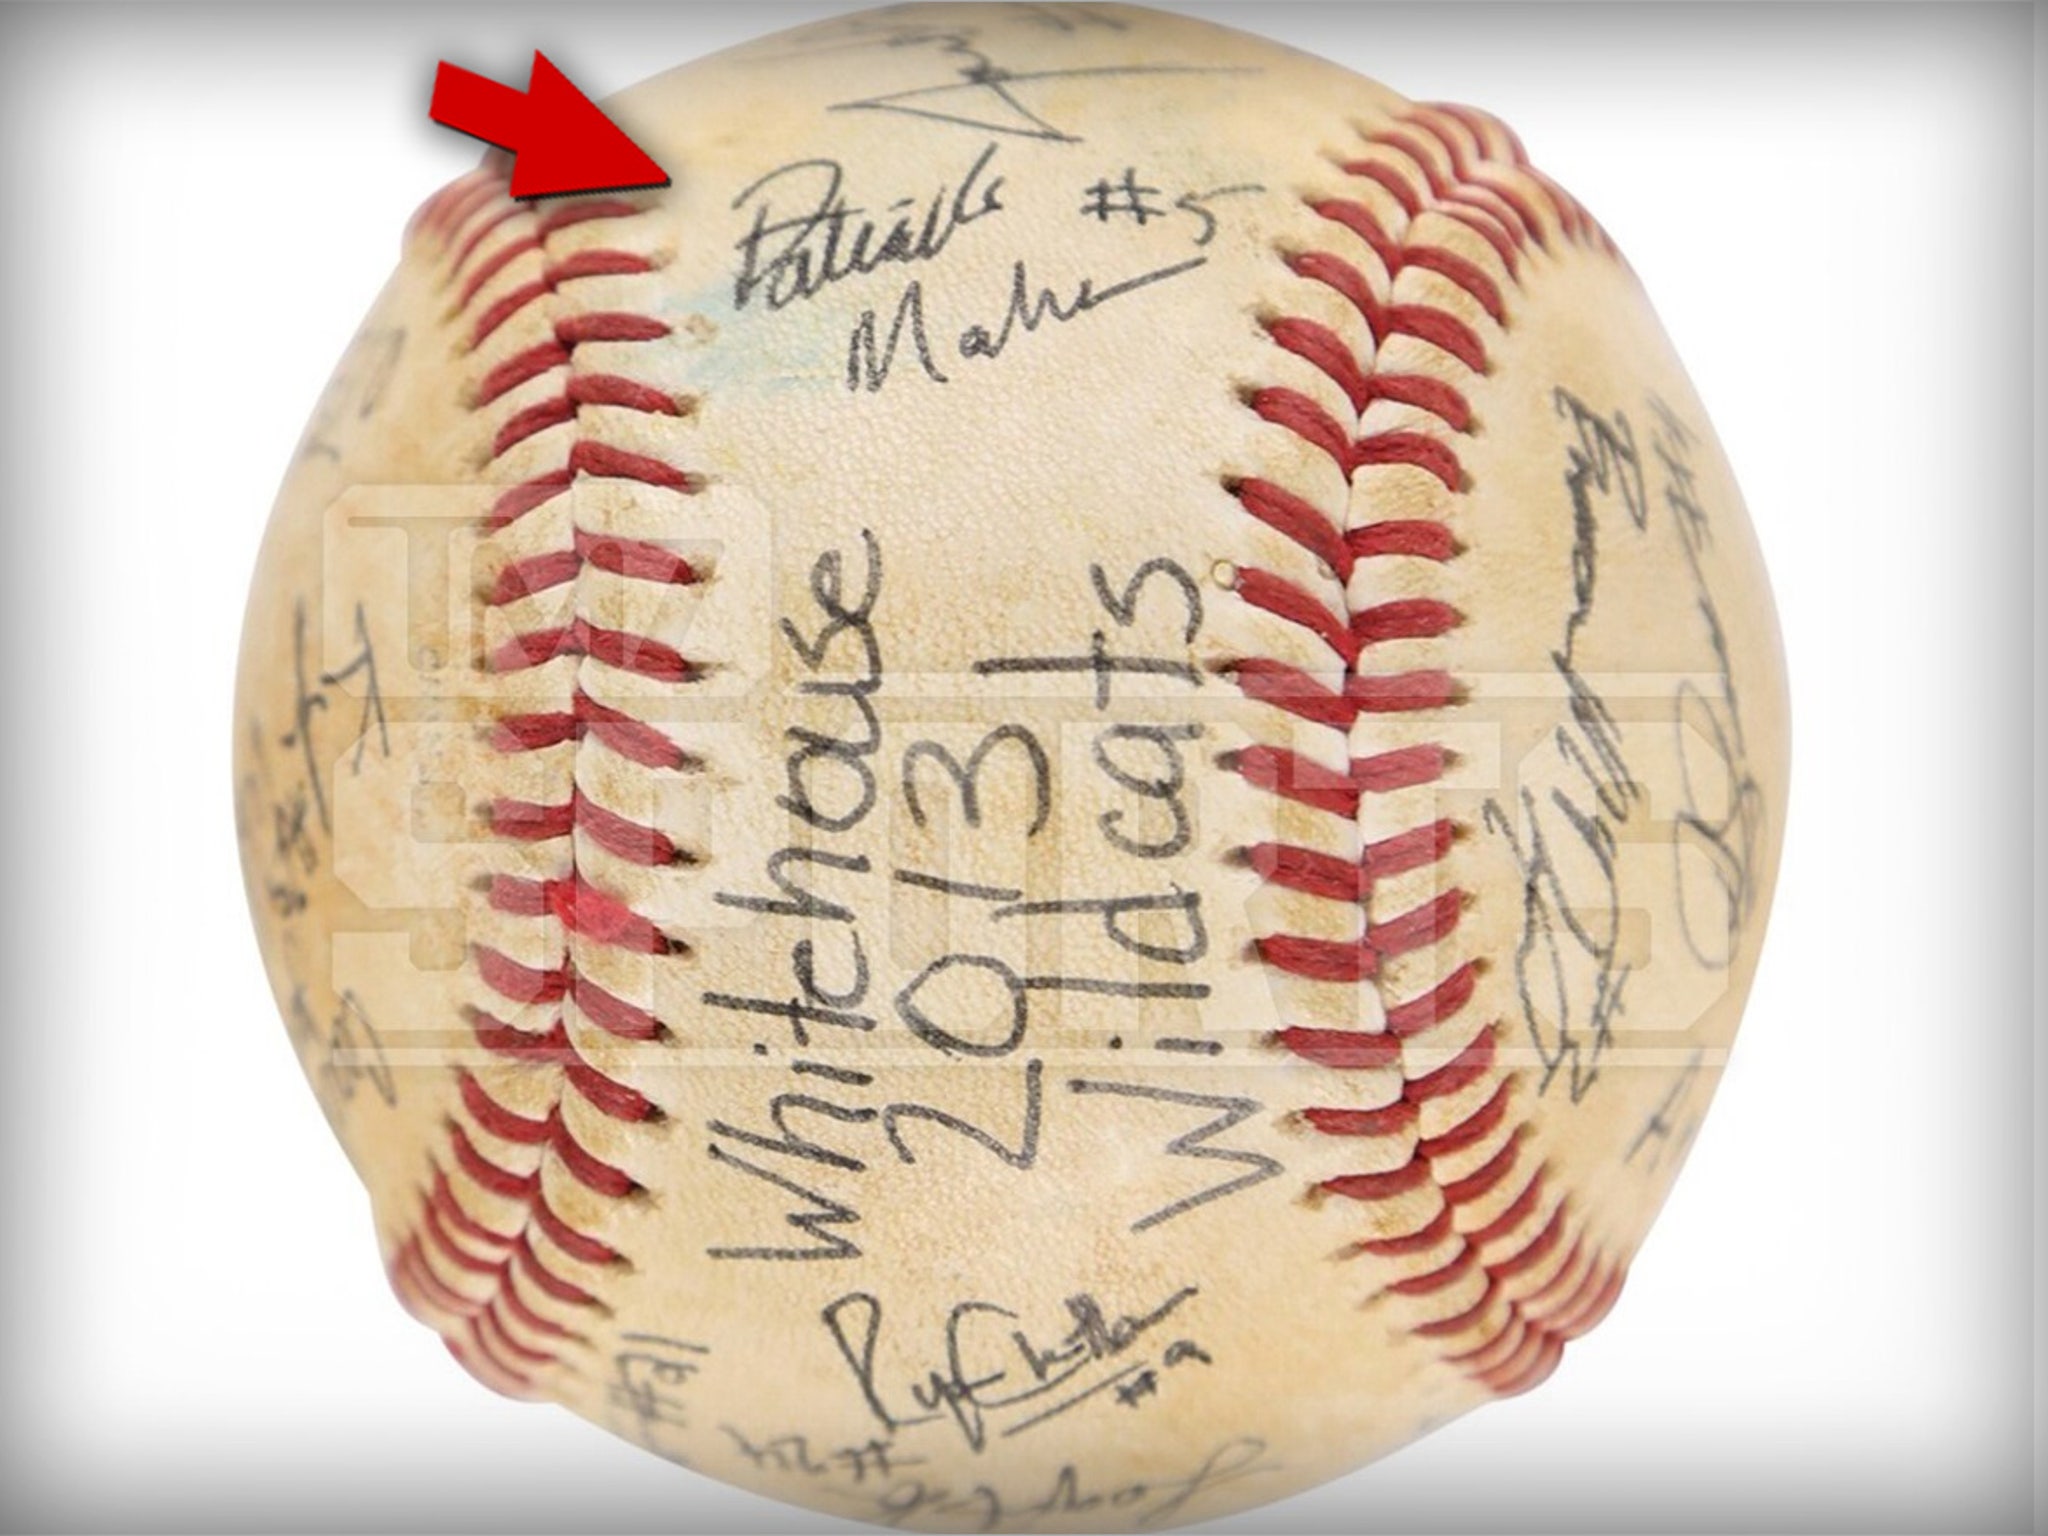 Patrick Mahomes Baseball Autographed In H.S. Hits Auction, 2013